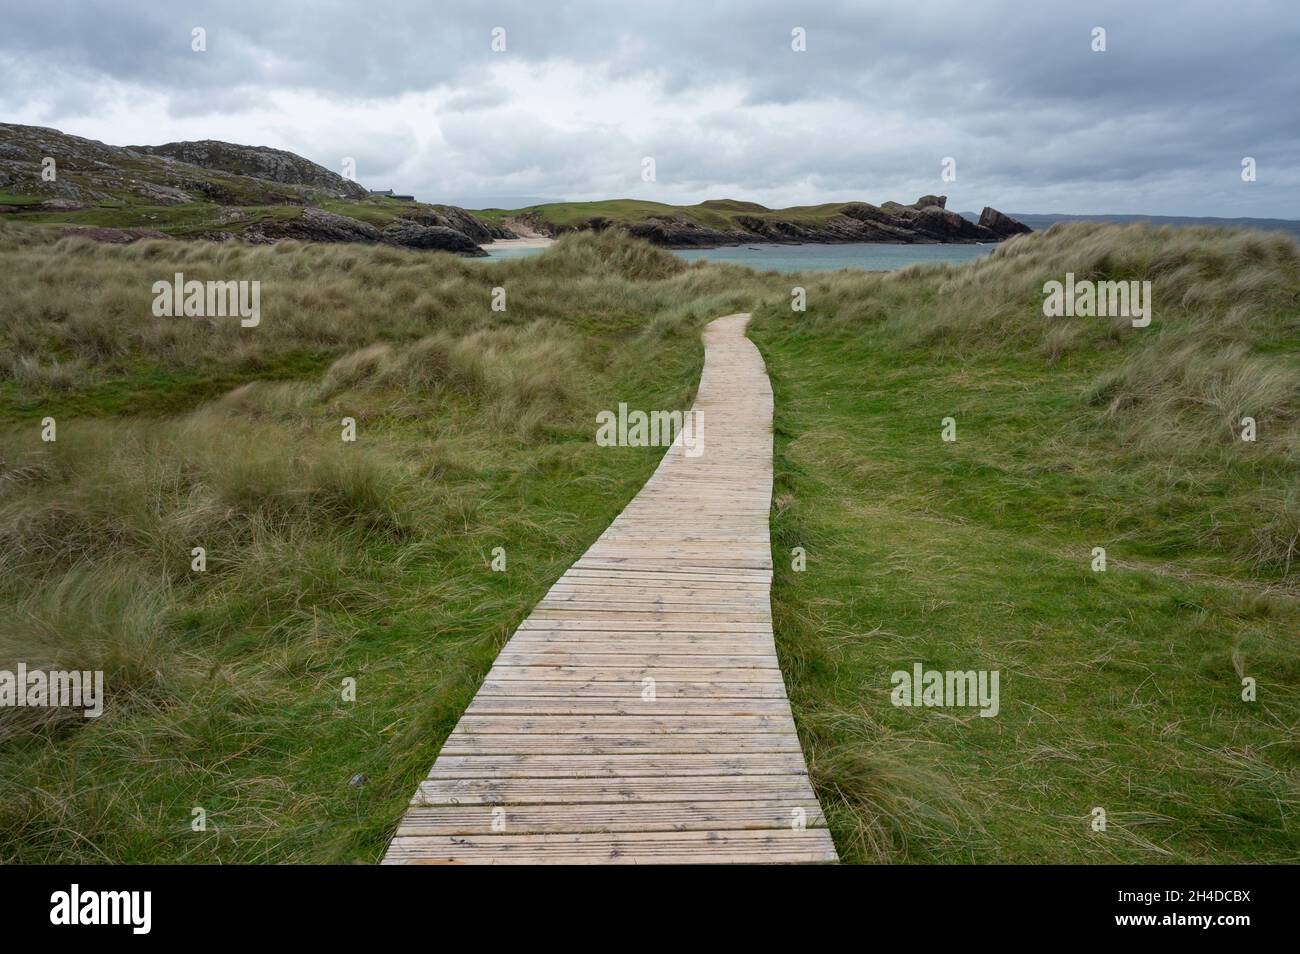 Clachtoll beach in Assynt, Scottish Highlands on a cloudy day with dramatic sky. Wooden boardwalk leading through grass to beach. Stock Photo